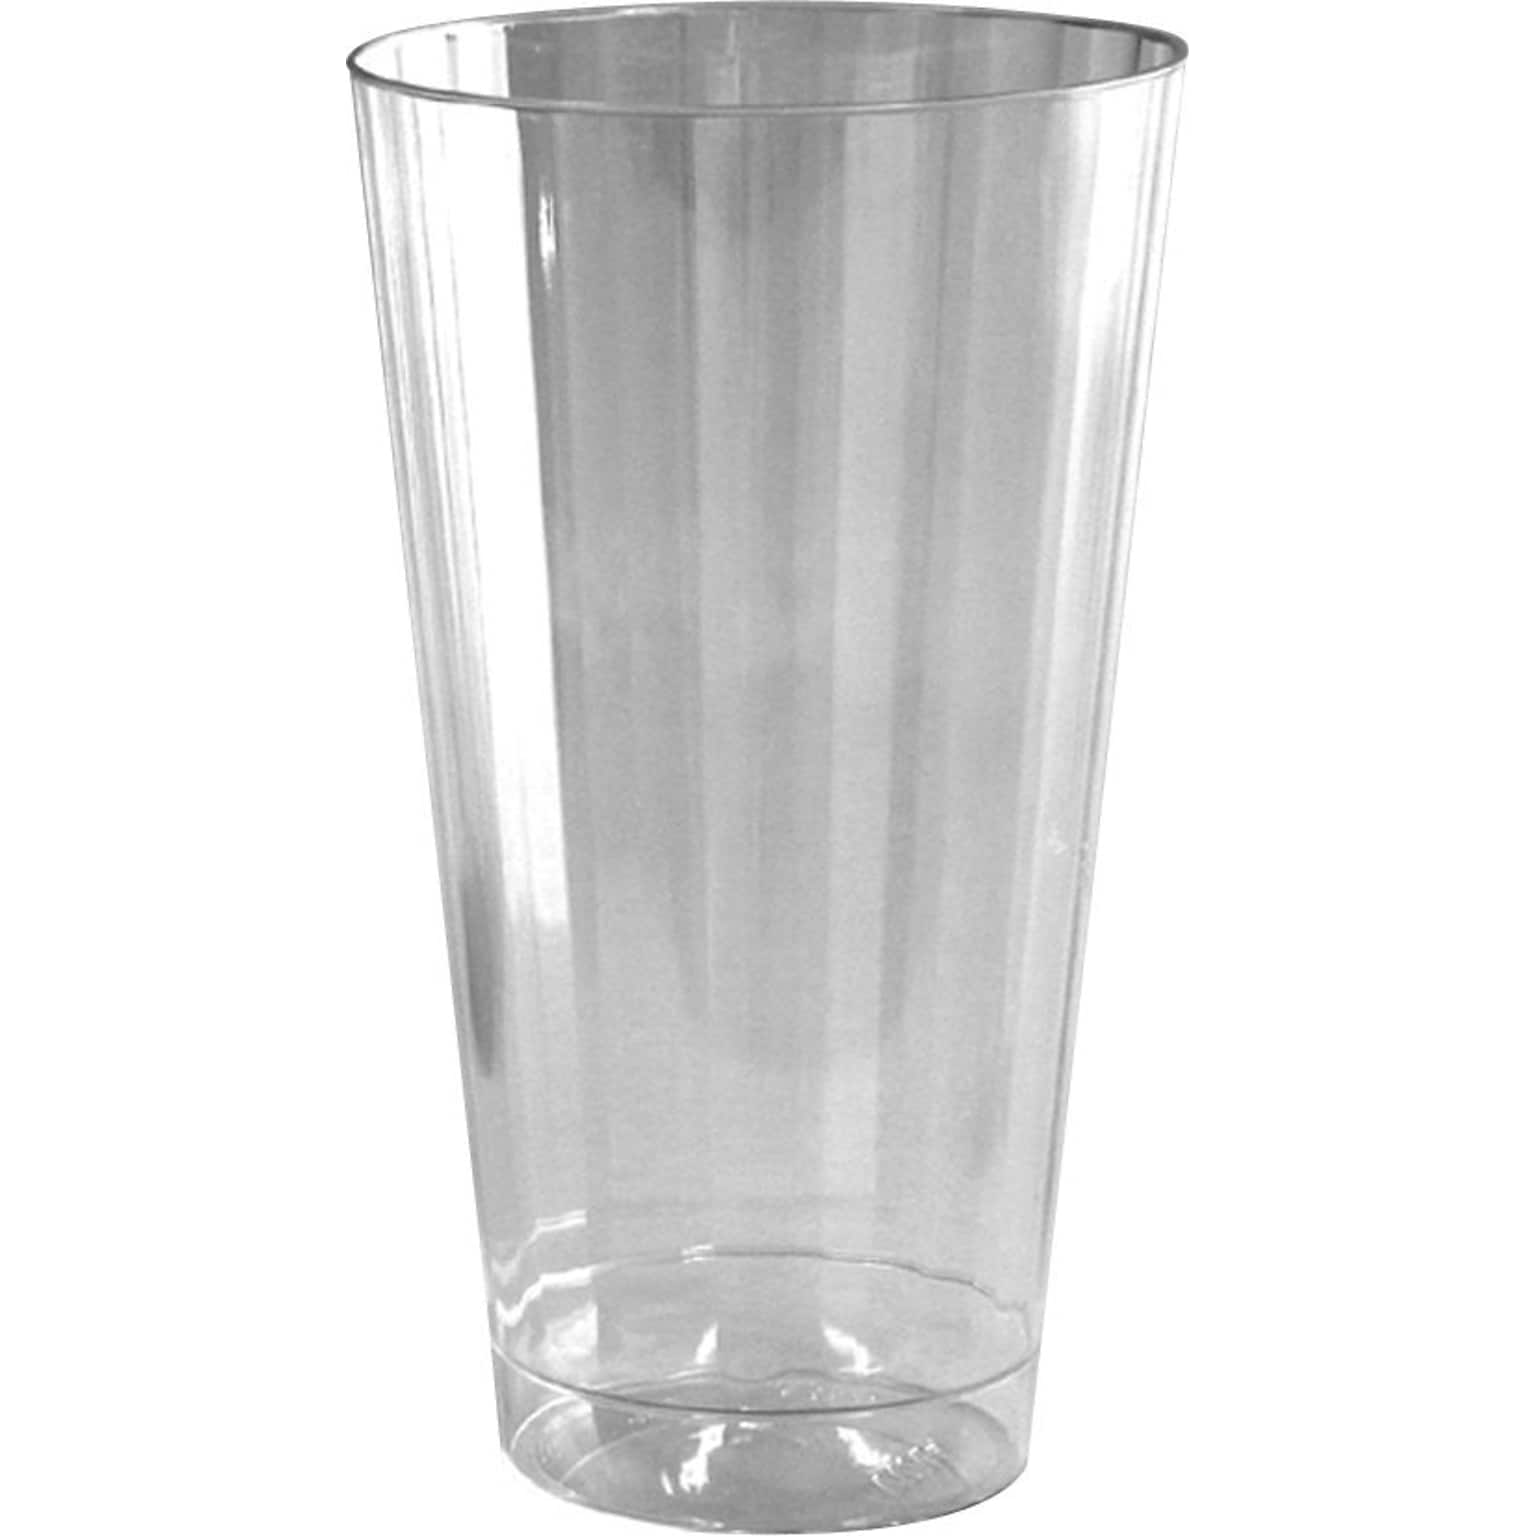 WNA Classic Crystal Plastic Cold Cup, 16 oz., Clear, 20 Cups/Pack, 12 Packs/Carton (WNACC16240)